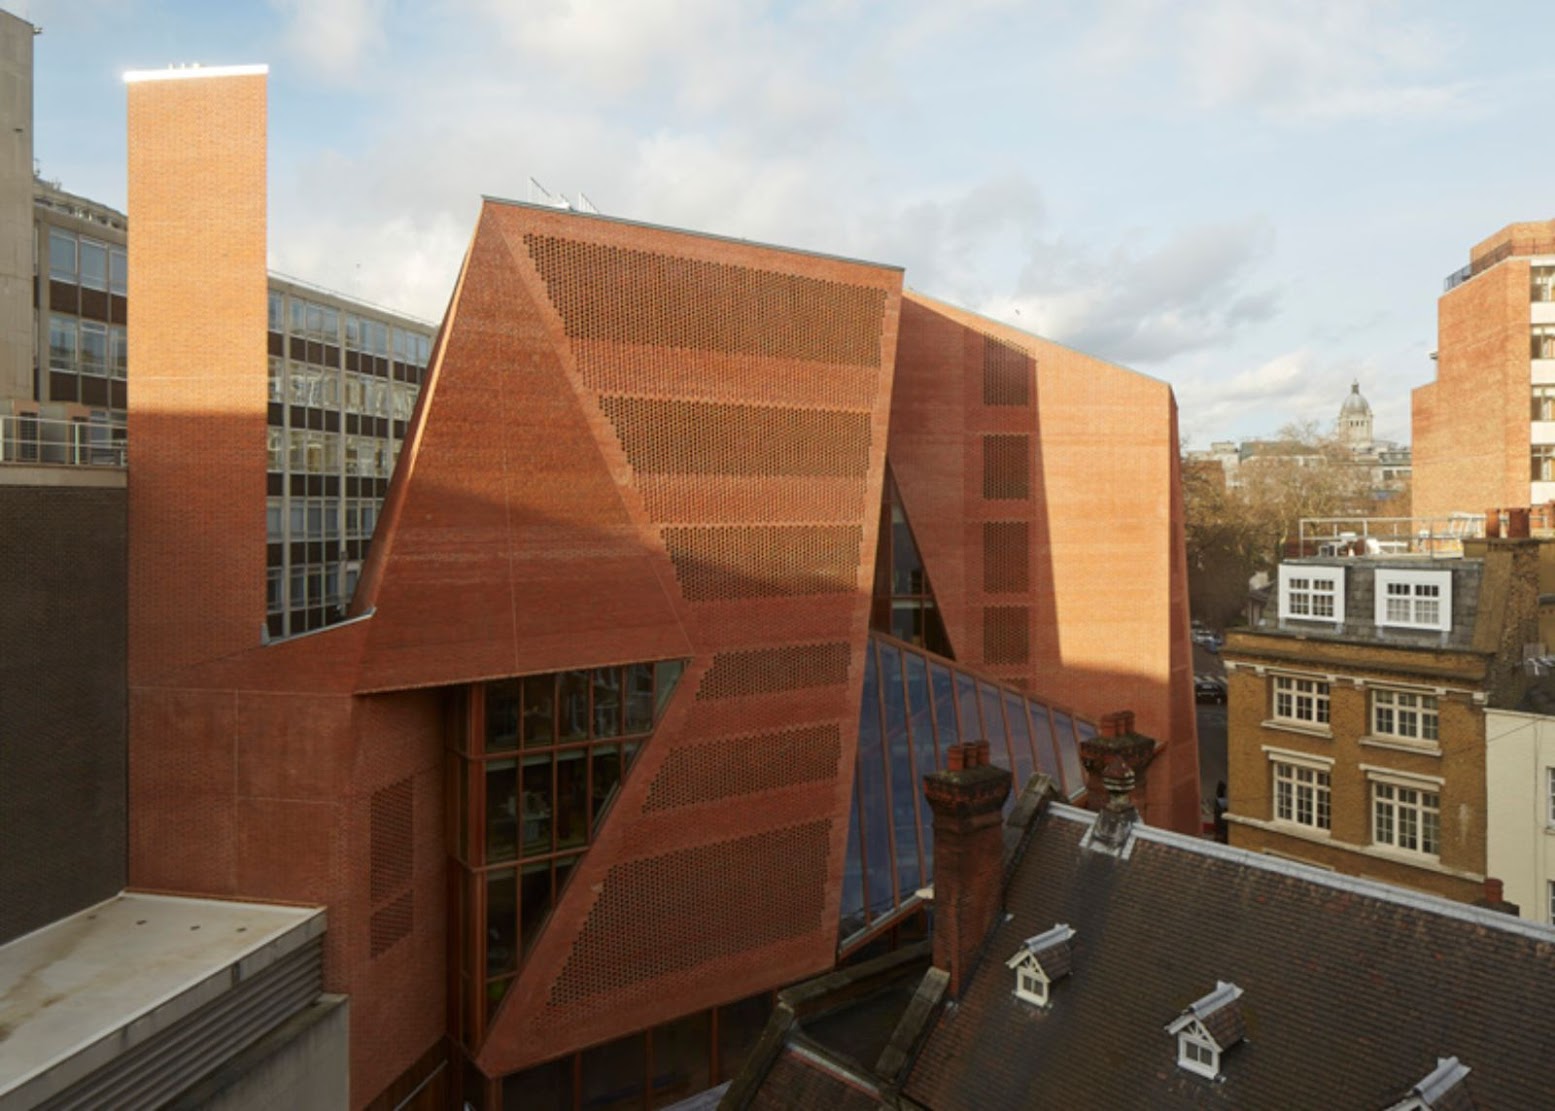 Londra, Regno Unito: [LSE SAW SWEE HOCK STUDENTS' CENTRE BY O'DONNELL + TUOMEY]